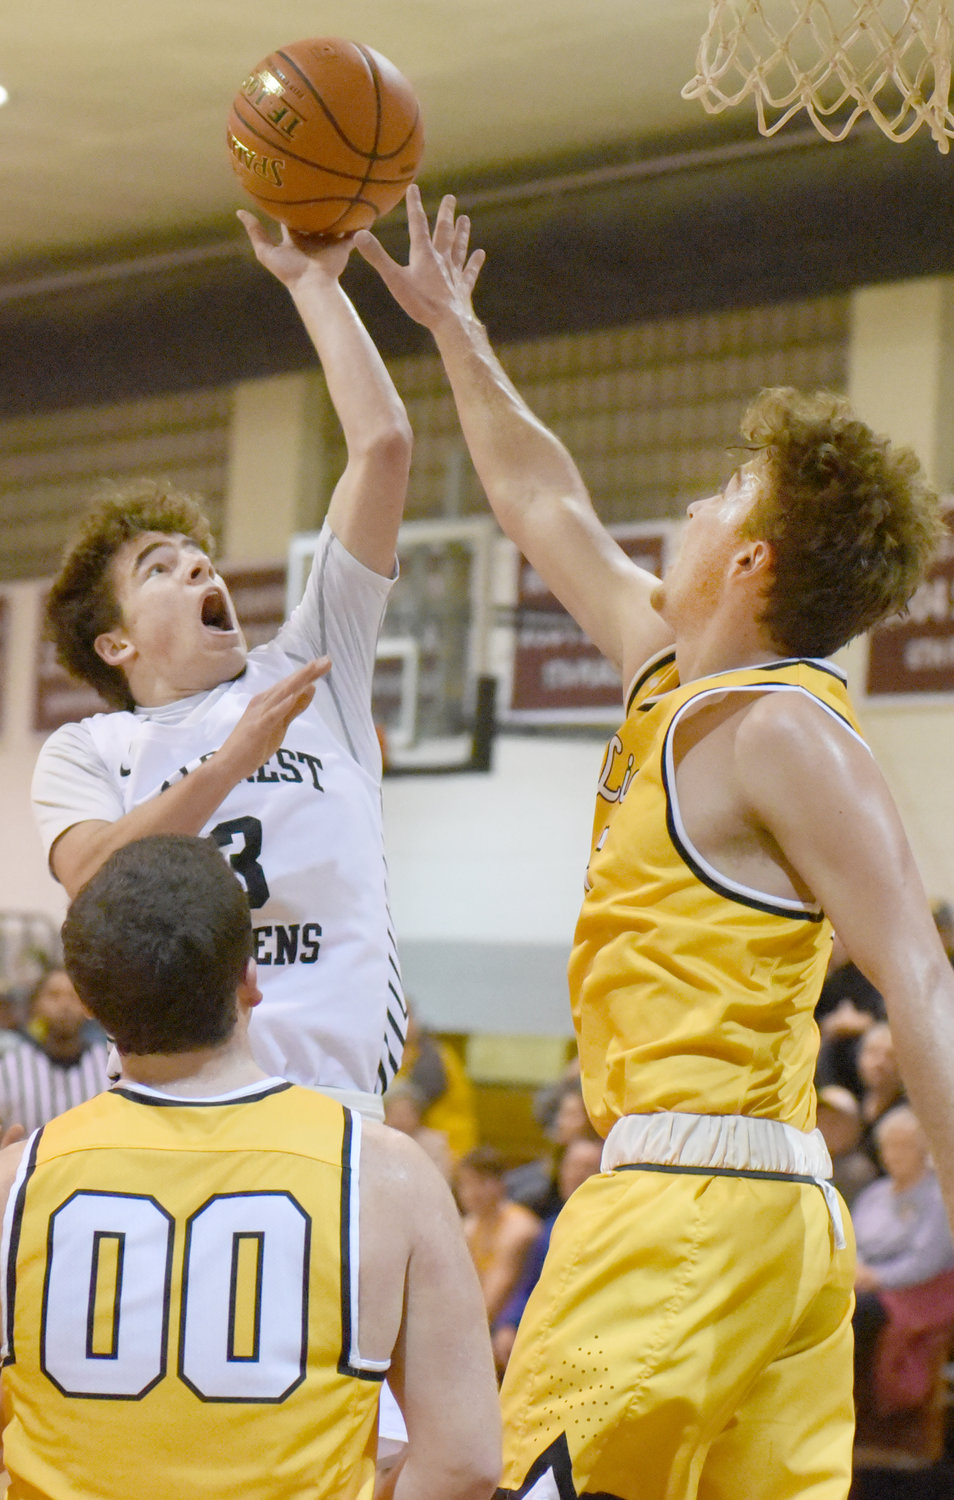 Noah Miller gets a shot off for Hillcrest Academy over the outstretched hand of Lone Tree’s Keegan Edwards.